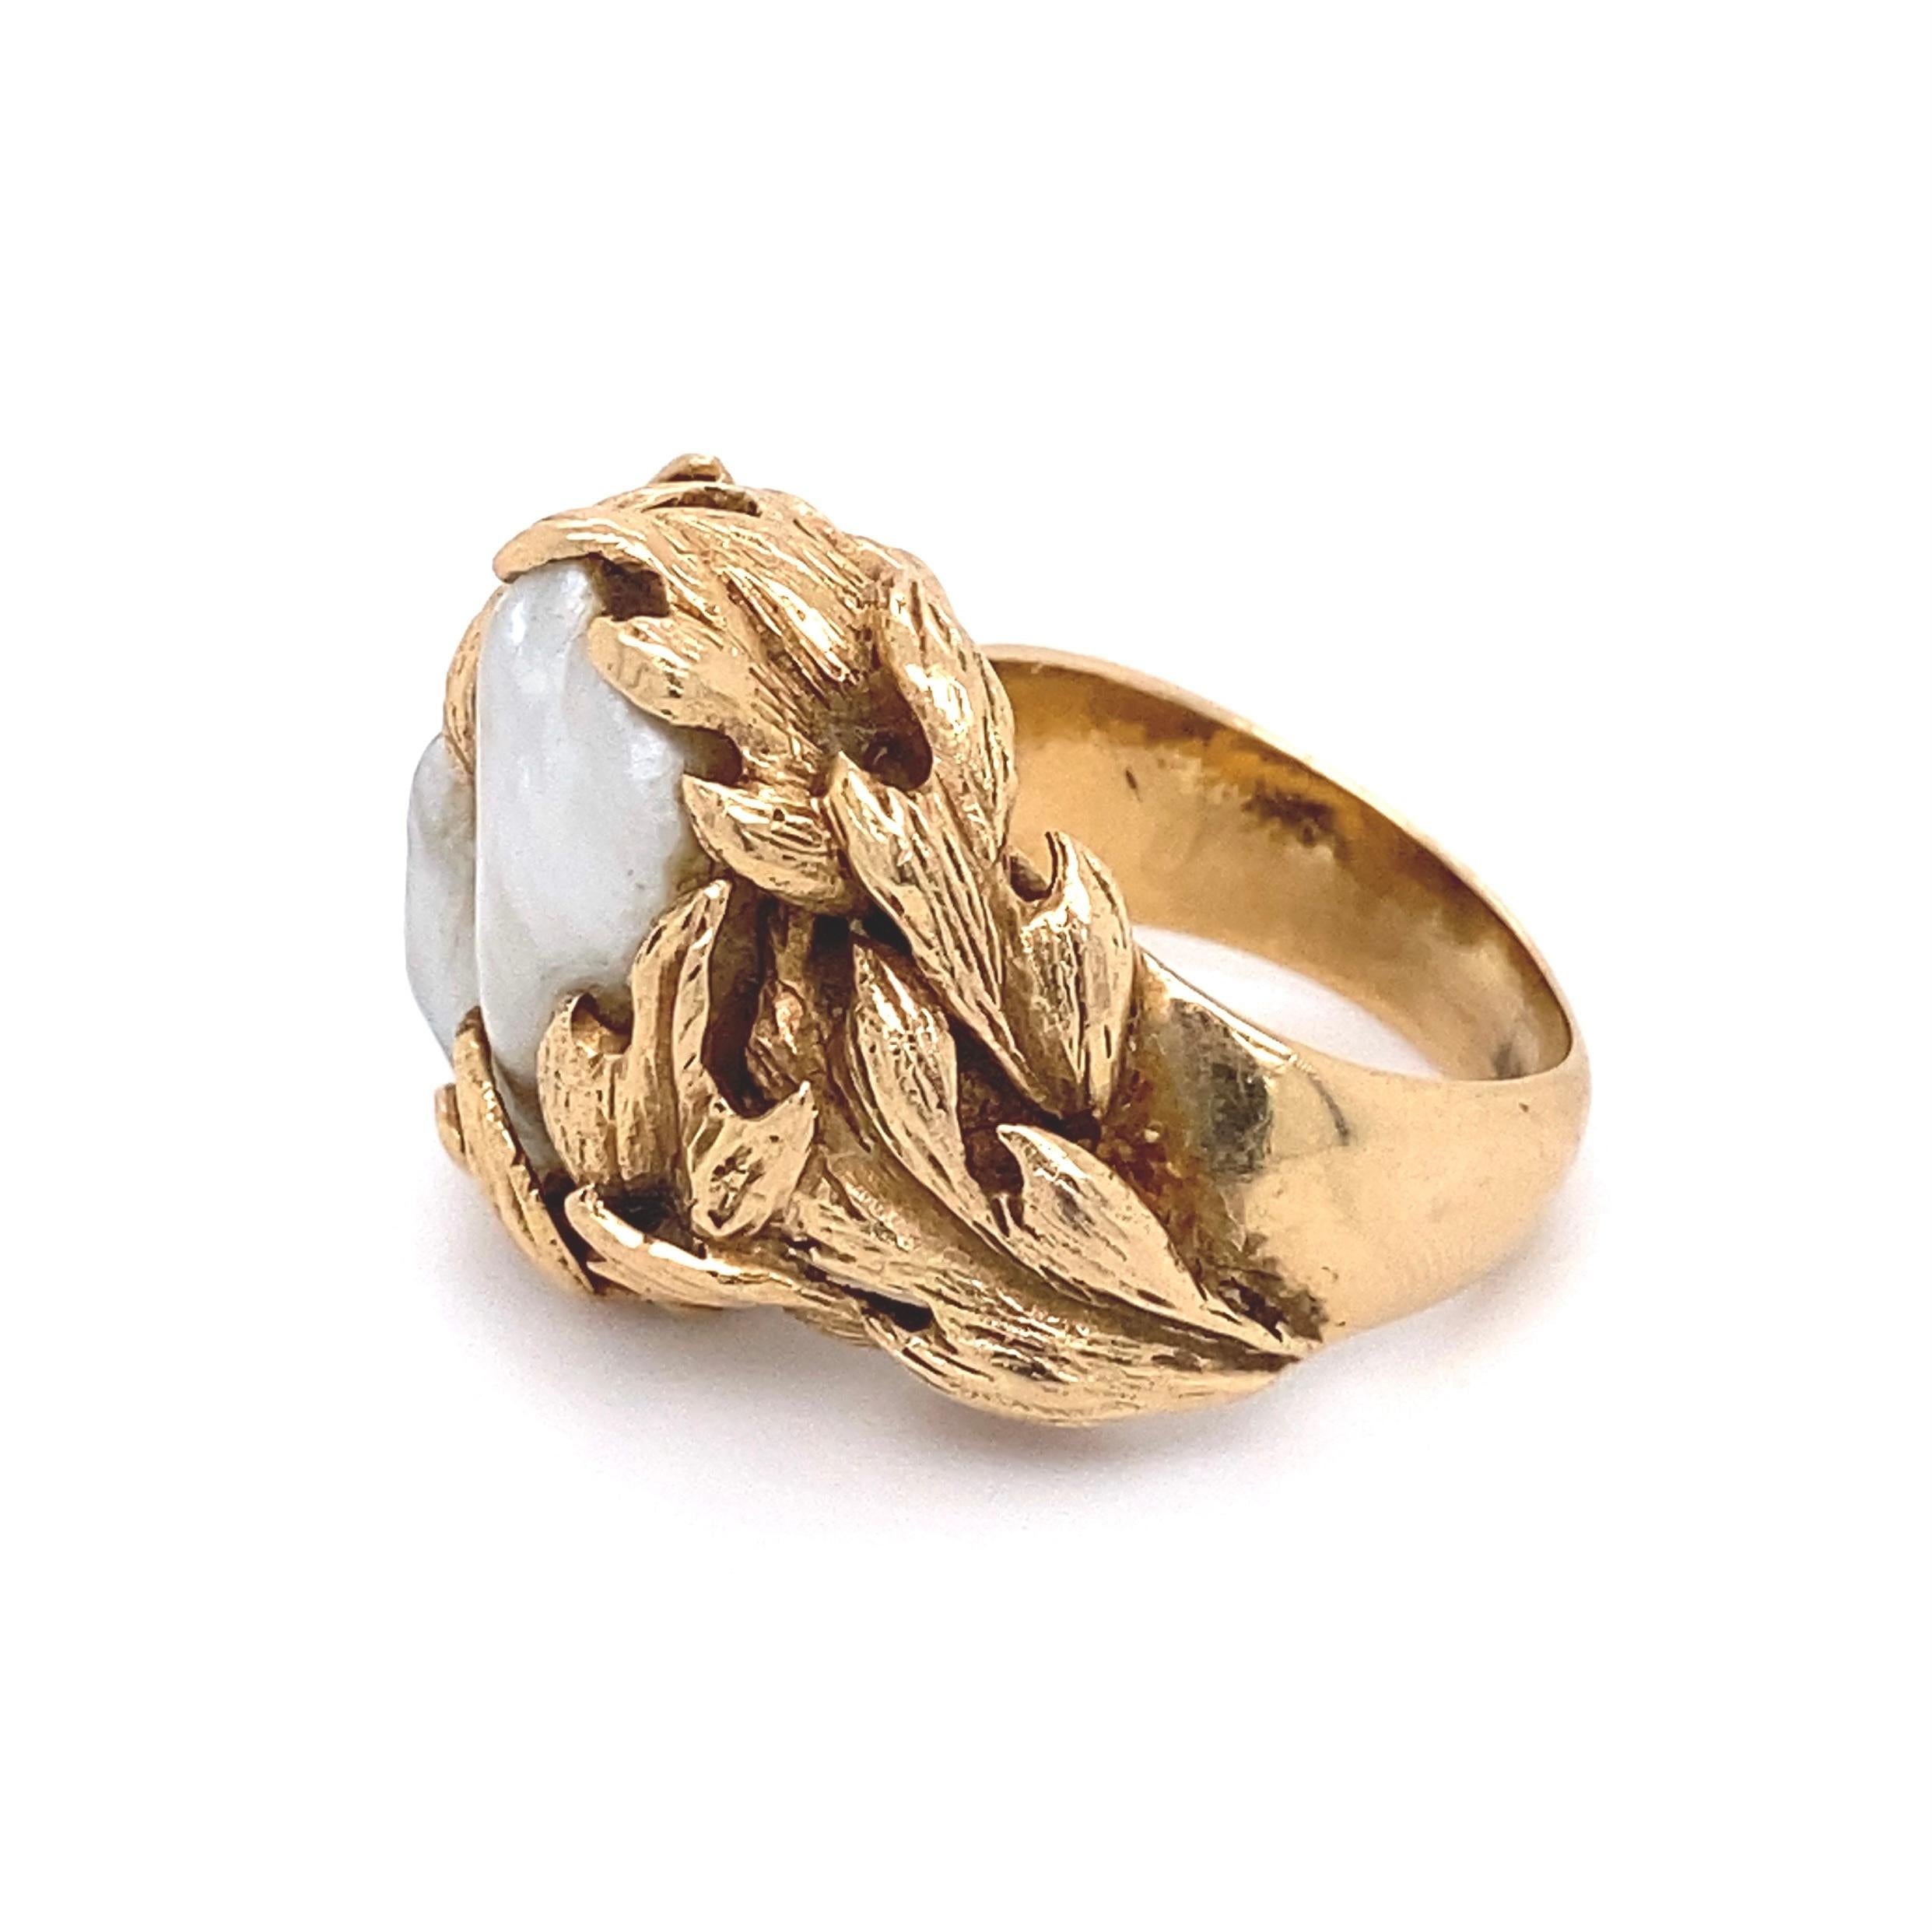 Baroque Pearl in Gold Leaves Cocktail Ring Estate Fine Jewelry In Excellent Condition For Sale In Montreal, QC